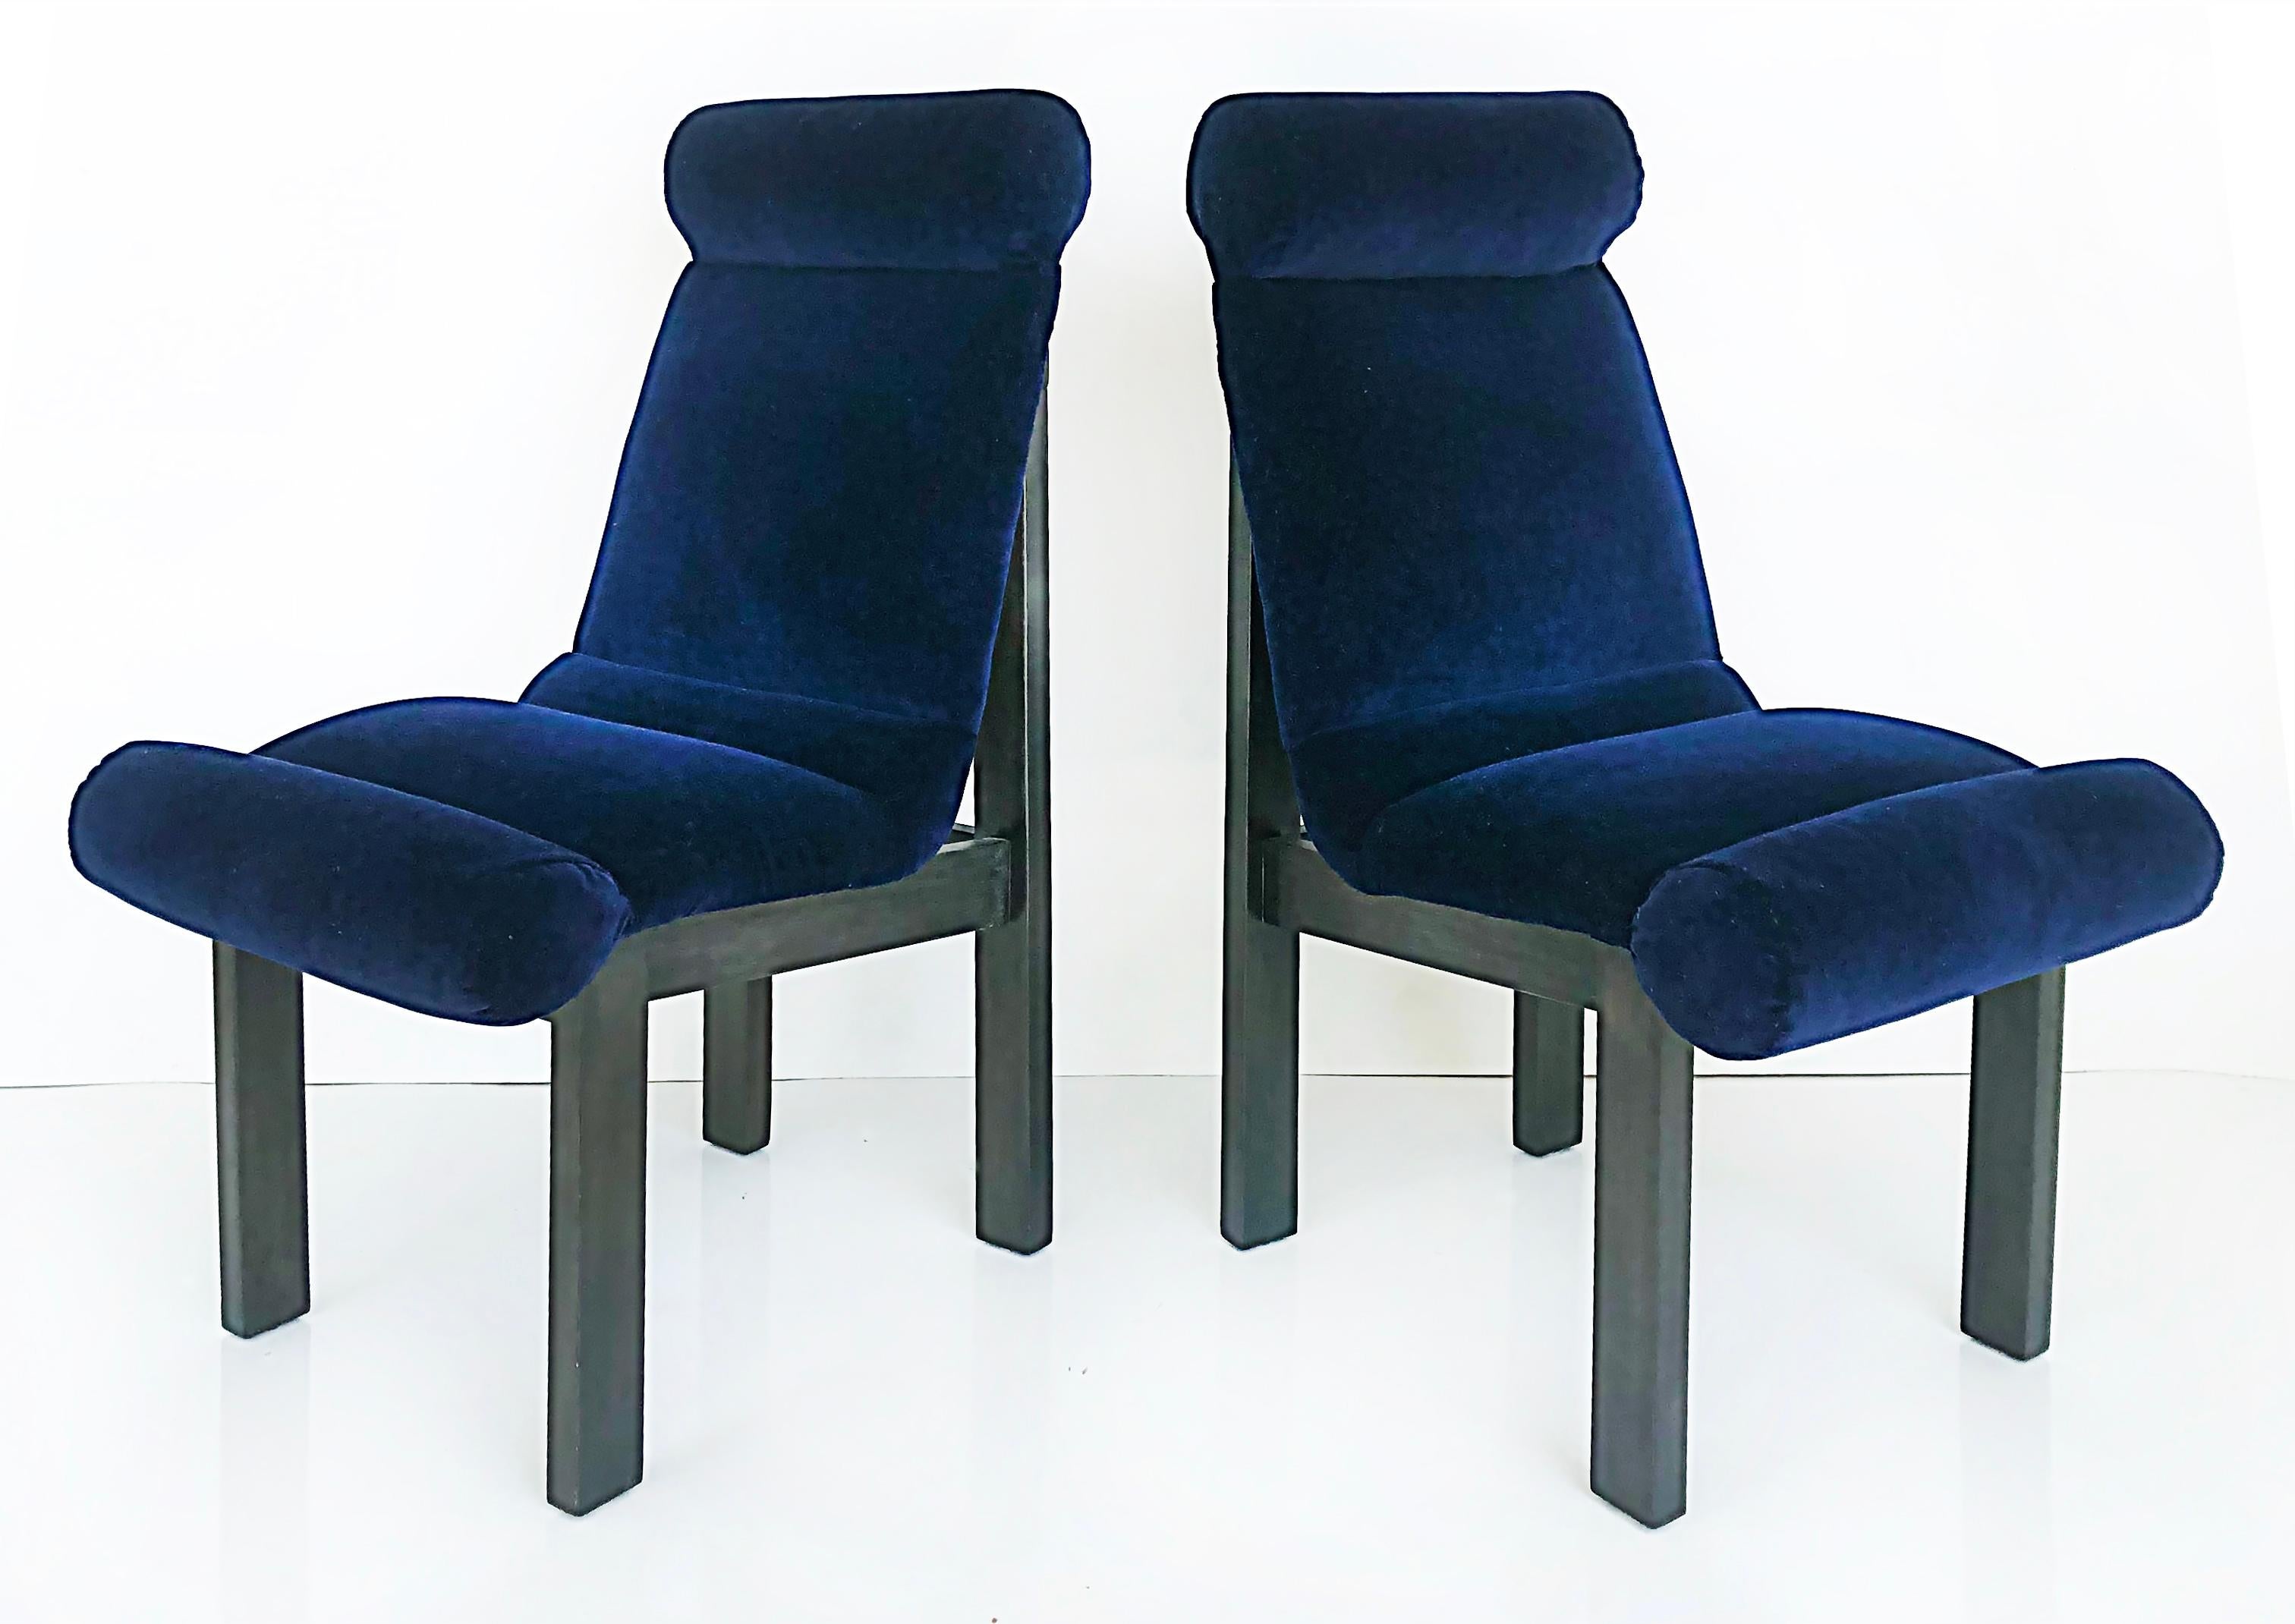 1960s Set of 6 United Furniture Mohair velvet dining chairs

Offered for sale is a set of six 1960s Mid-Century Modern sculptural dining chairs by United Furniture Corporation. The frames have been newly refinished with a dark satin stain. The